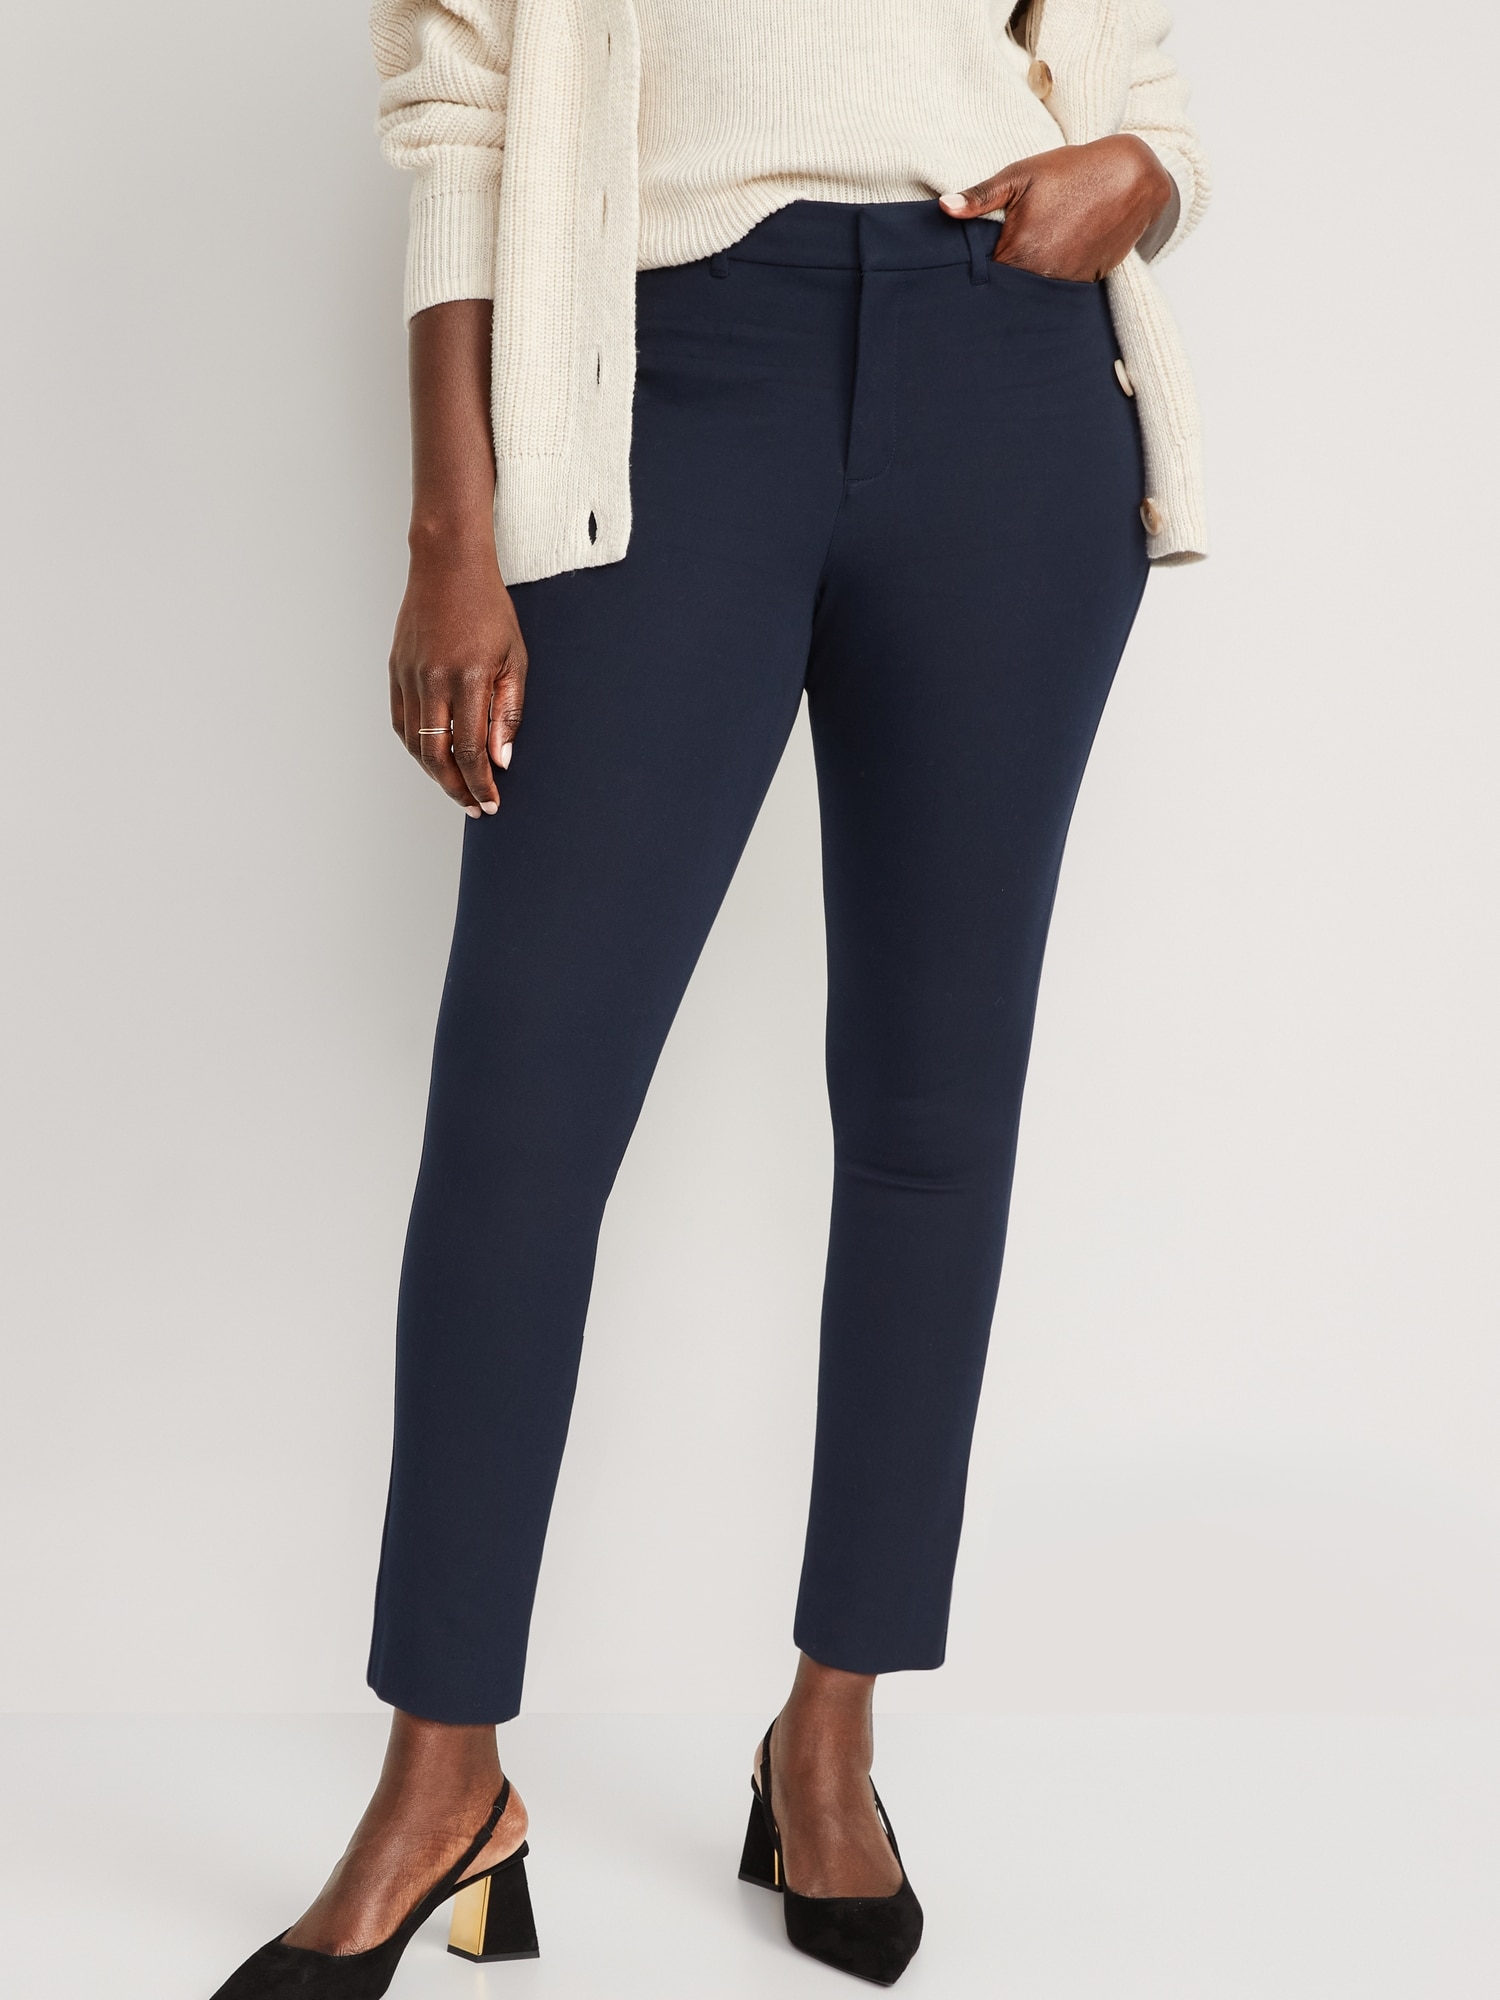 Old Navy Curvy High-Waisted Pixie Skinny Ankle Pants for Women